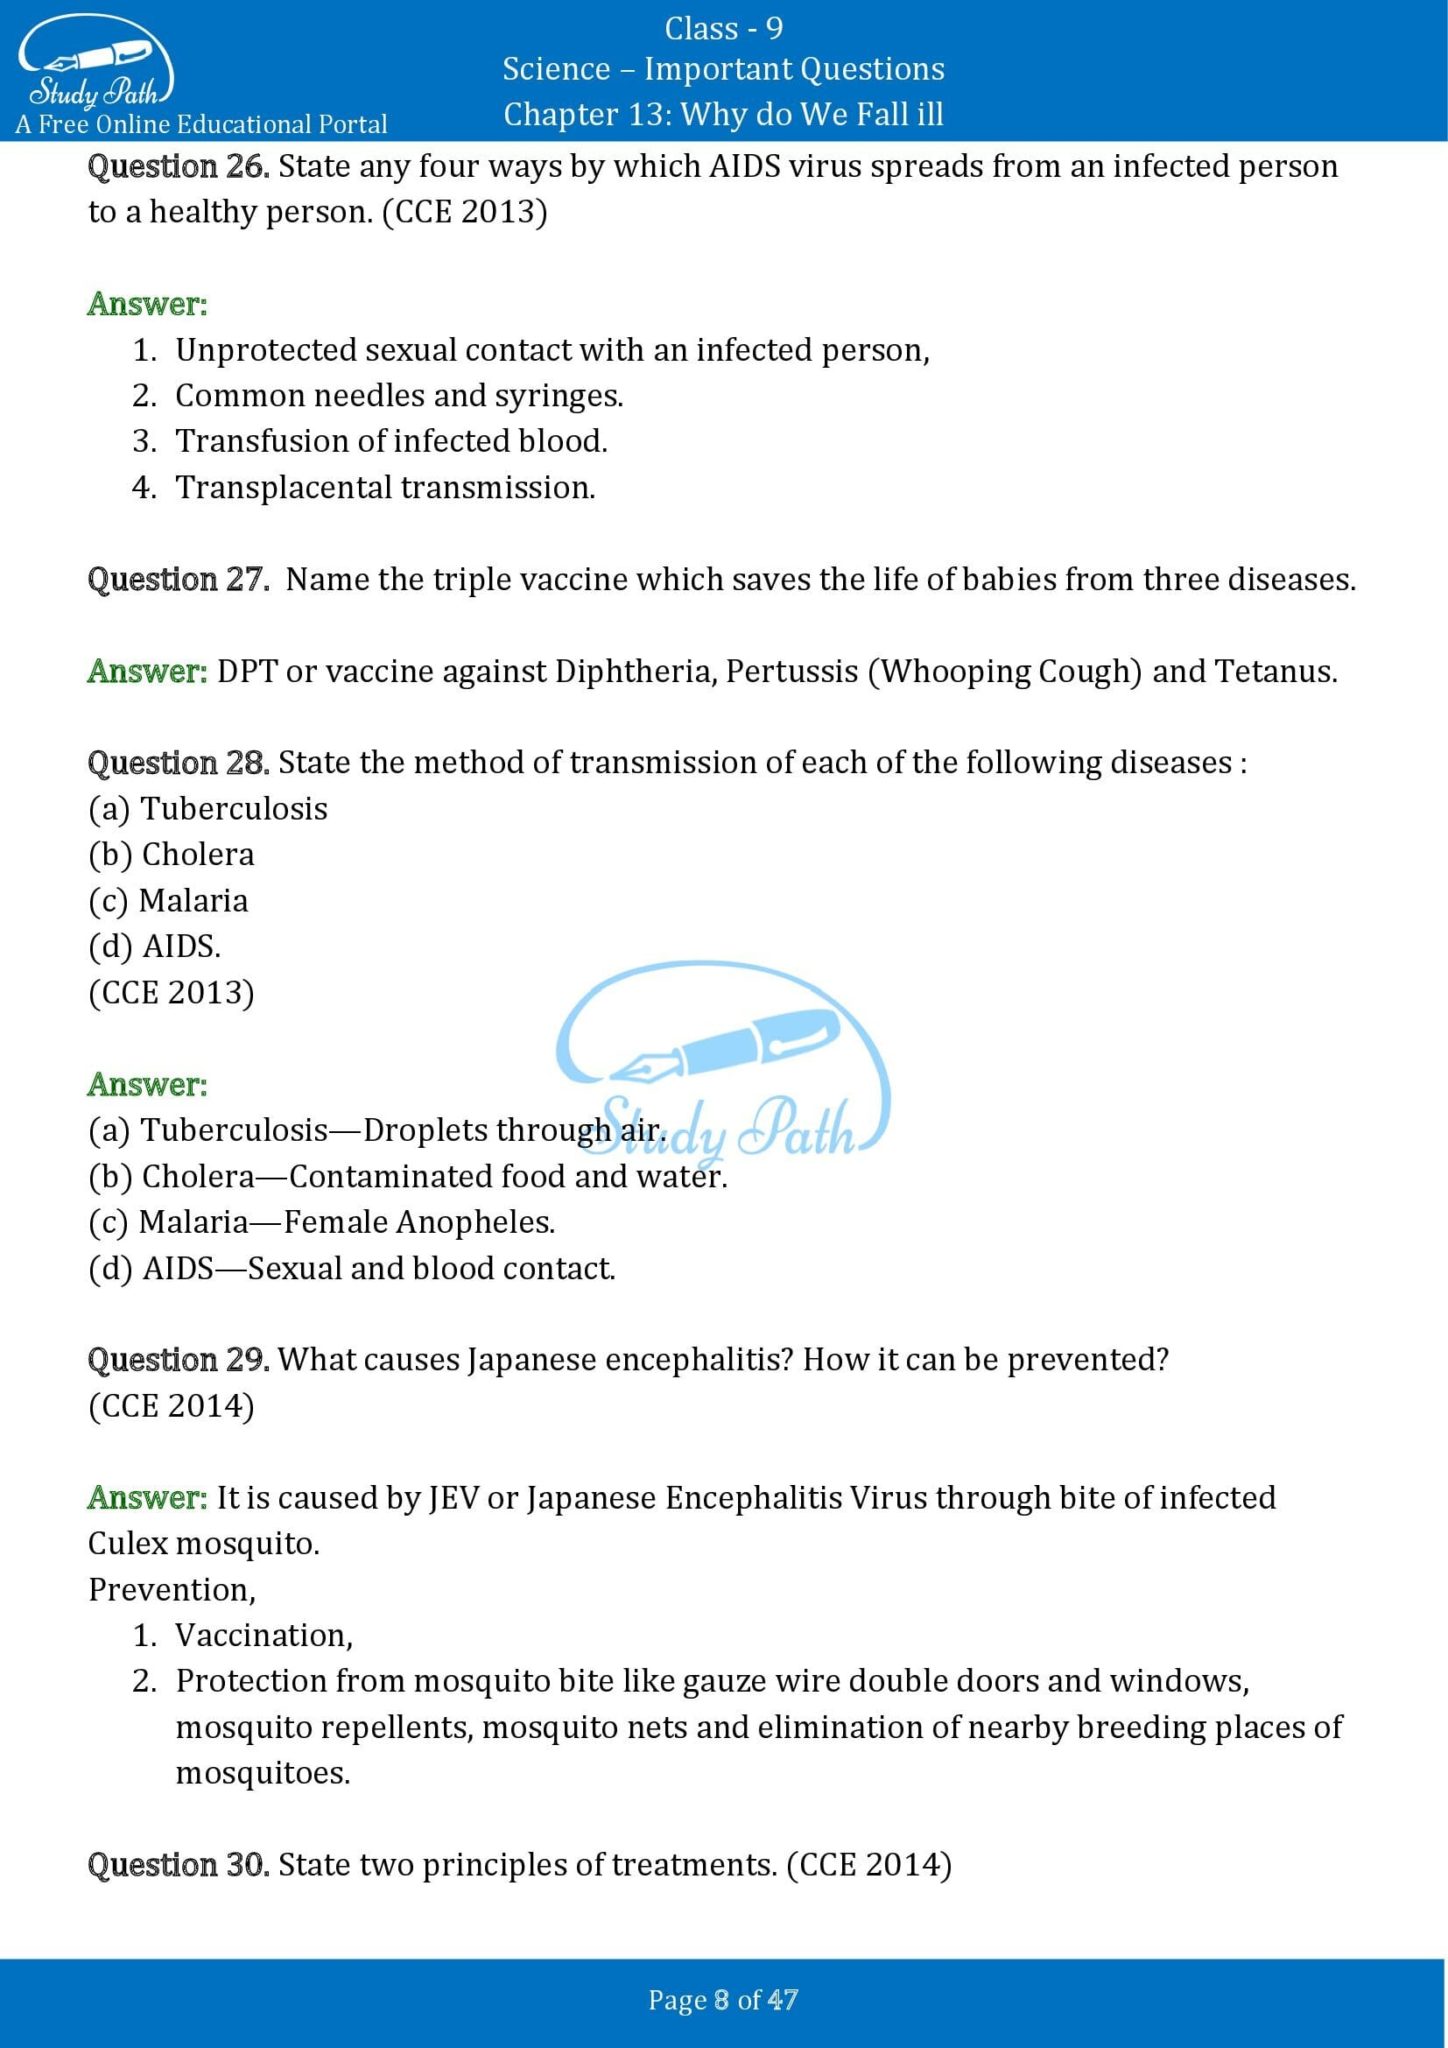 class 9 science chapter 13 case study questions